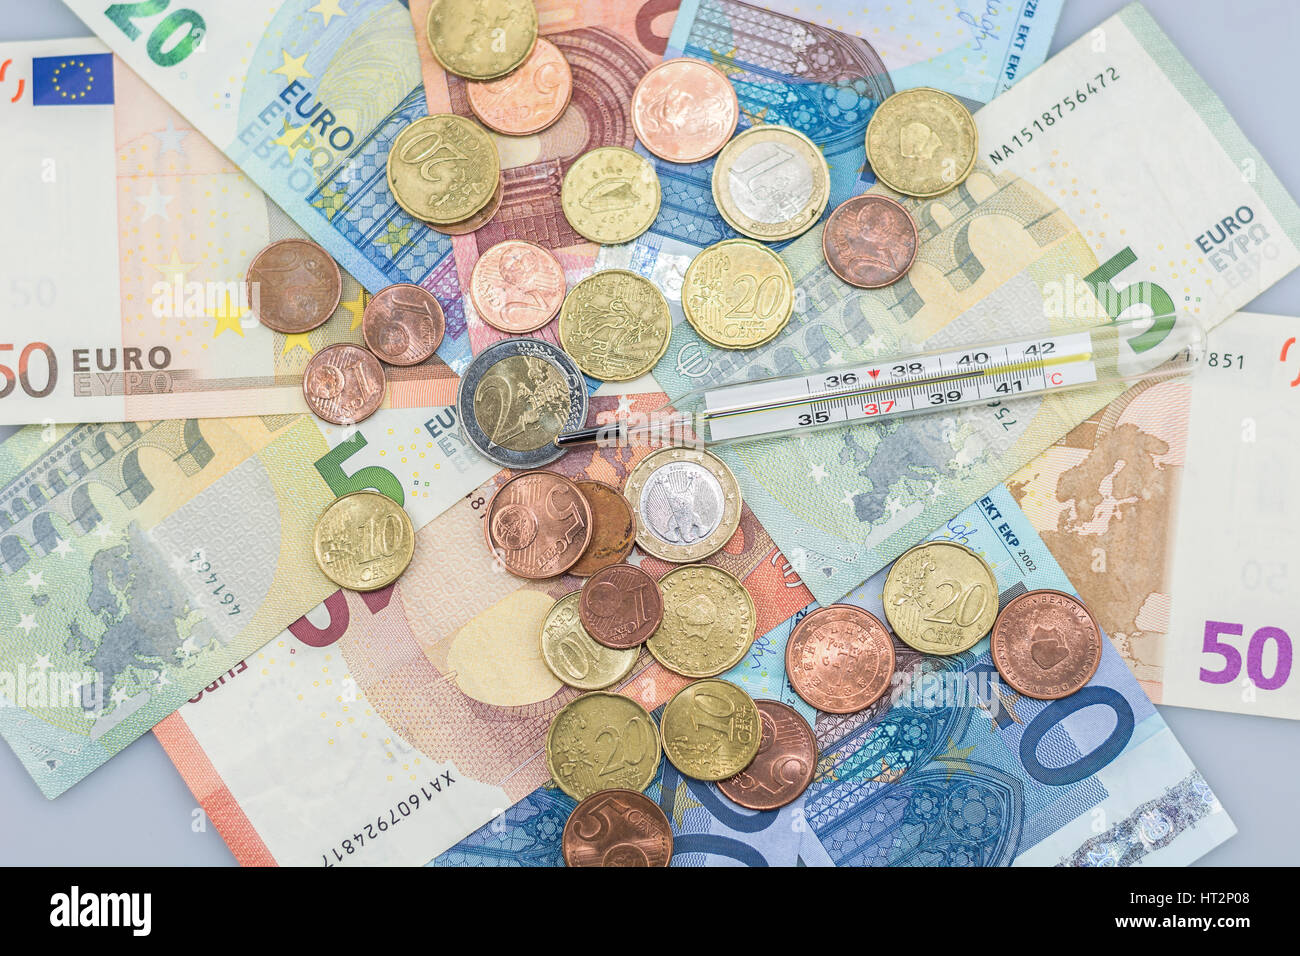 Thermometer on a pile of euros to symbolize the concerns about the euro. Stock Photo